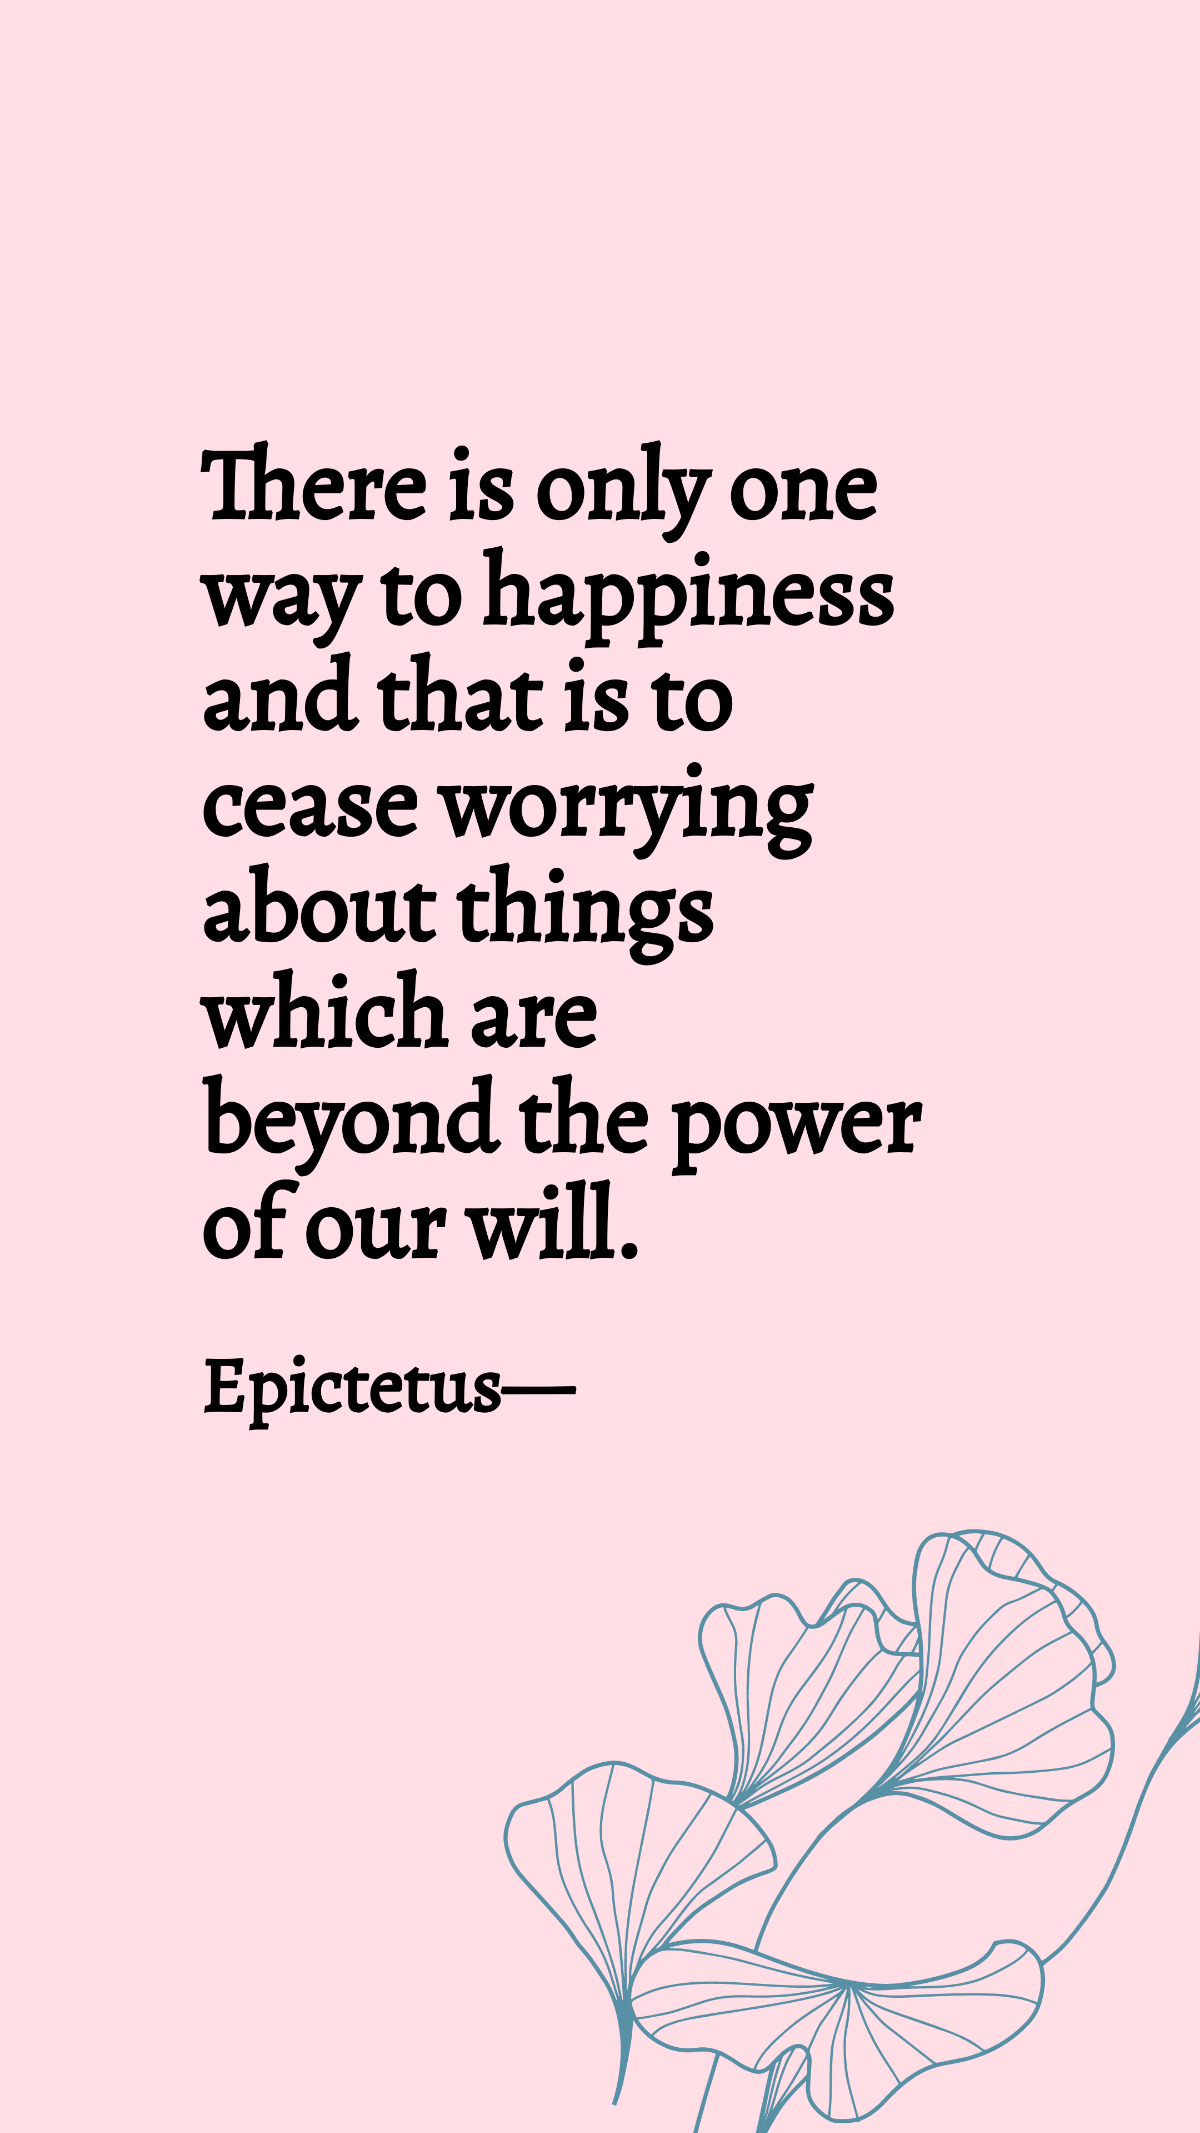 Epictetus - There is only one way to happiness and that is to cease worrying about things which are beyond the power of our will. Template